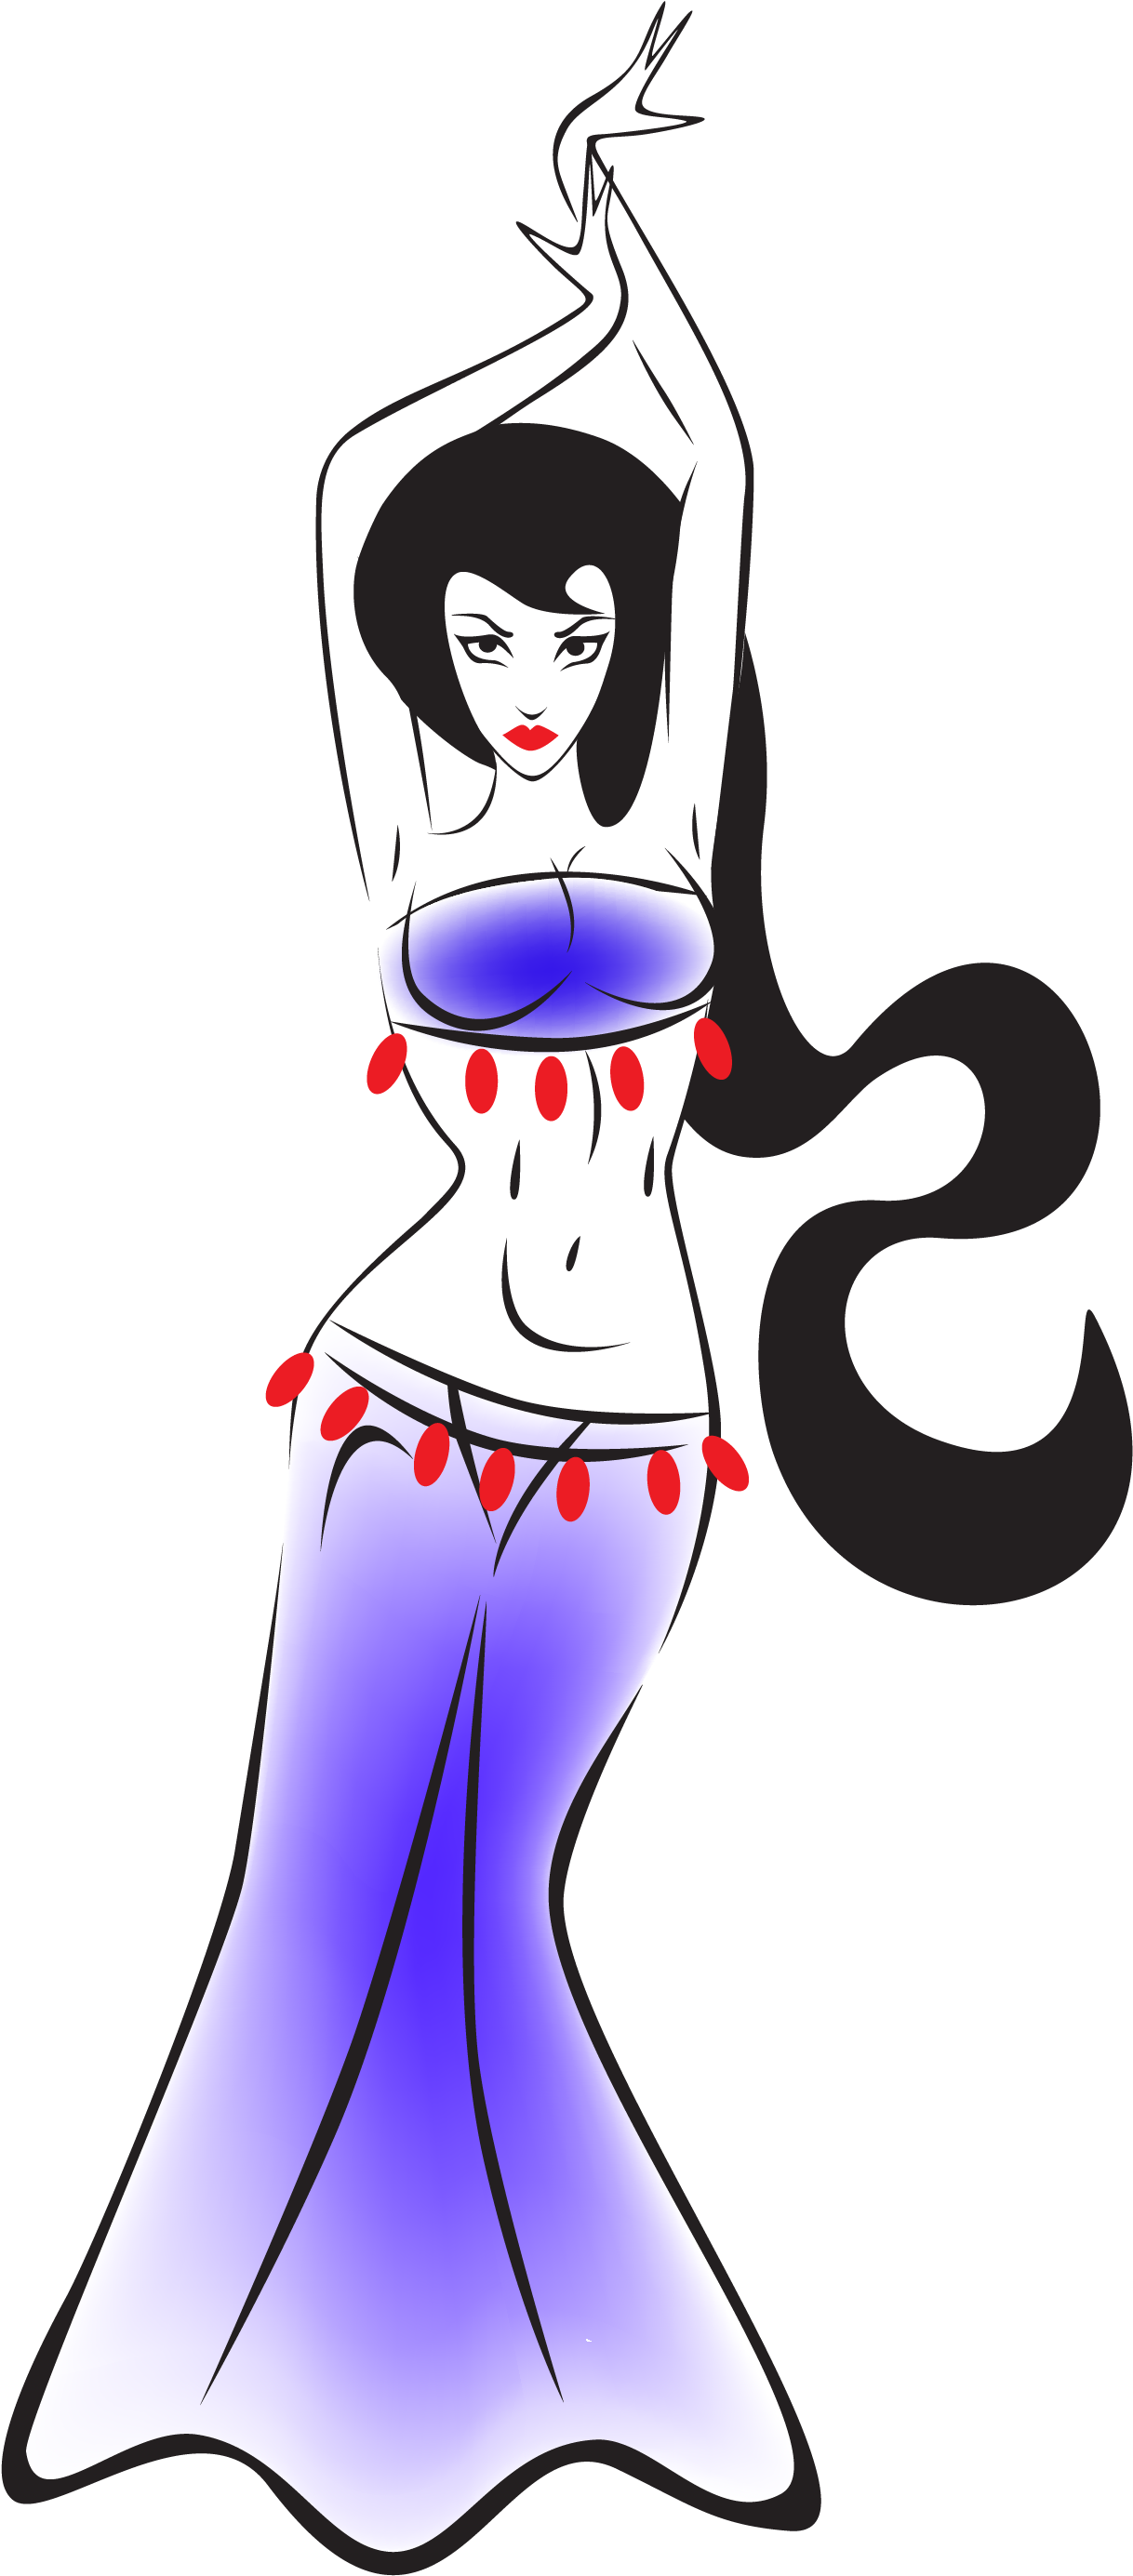 Belly Dance Shimmy Drawing - Belly Dance Shimmy Drawing (2037x2861)